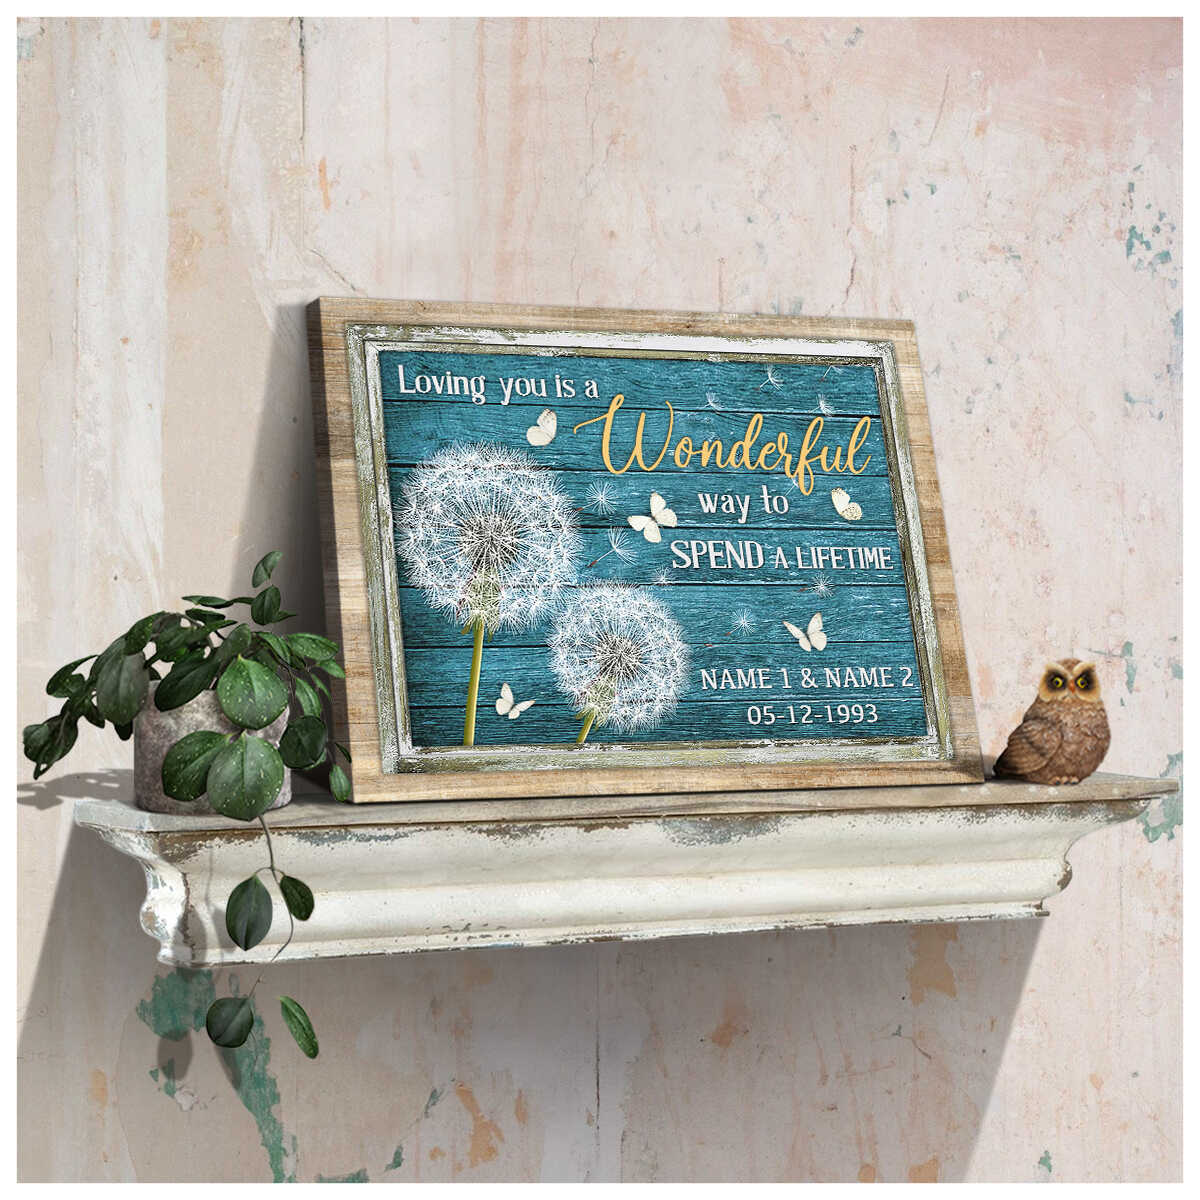 Custom Canvas Prints Personalized Gifts Wedding Anniversary Gifts Dandelion and Butterflies Wall Art Decor Ohcanvas Illustration 1